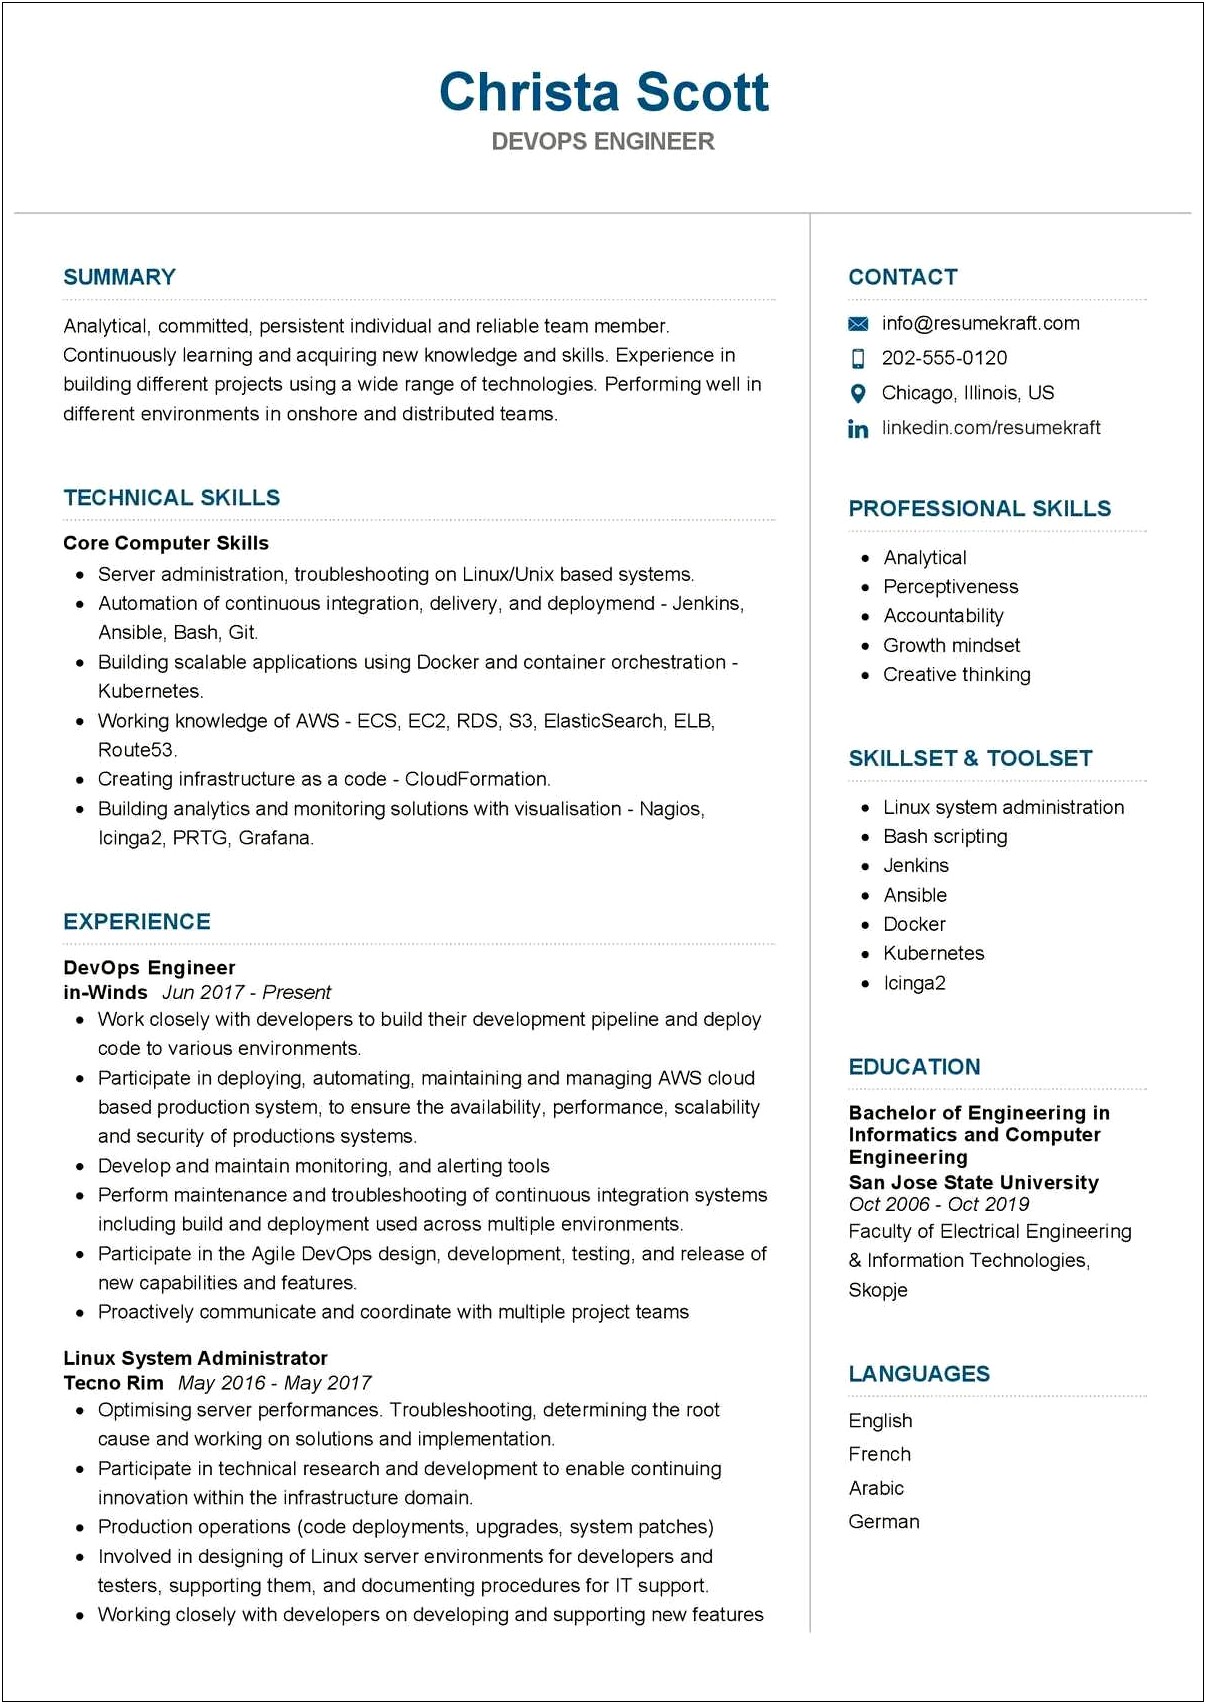 Sample Resume For Troubleshooting Linux